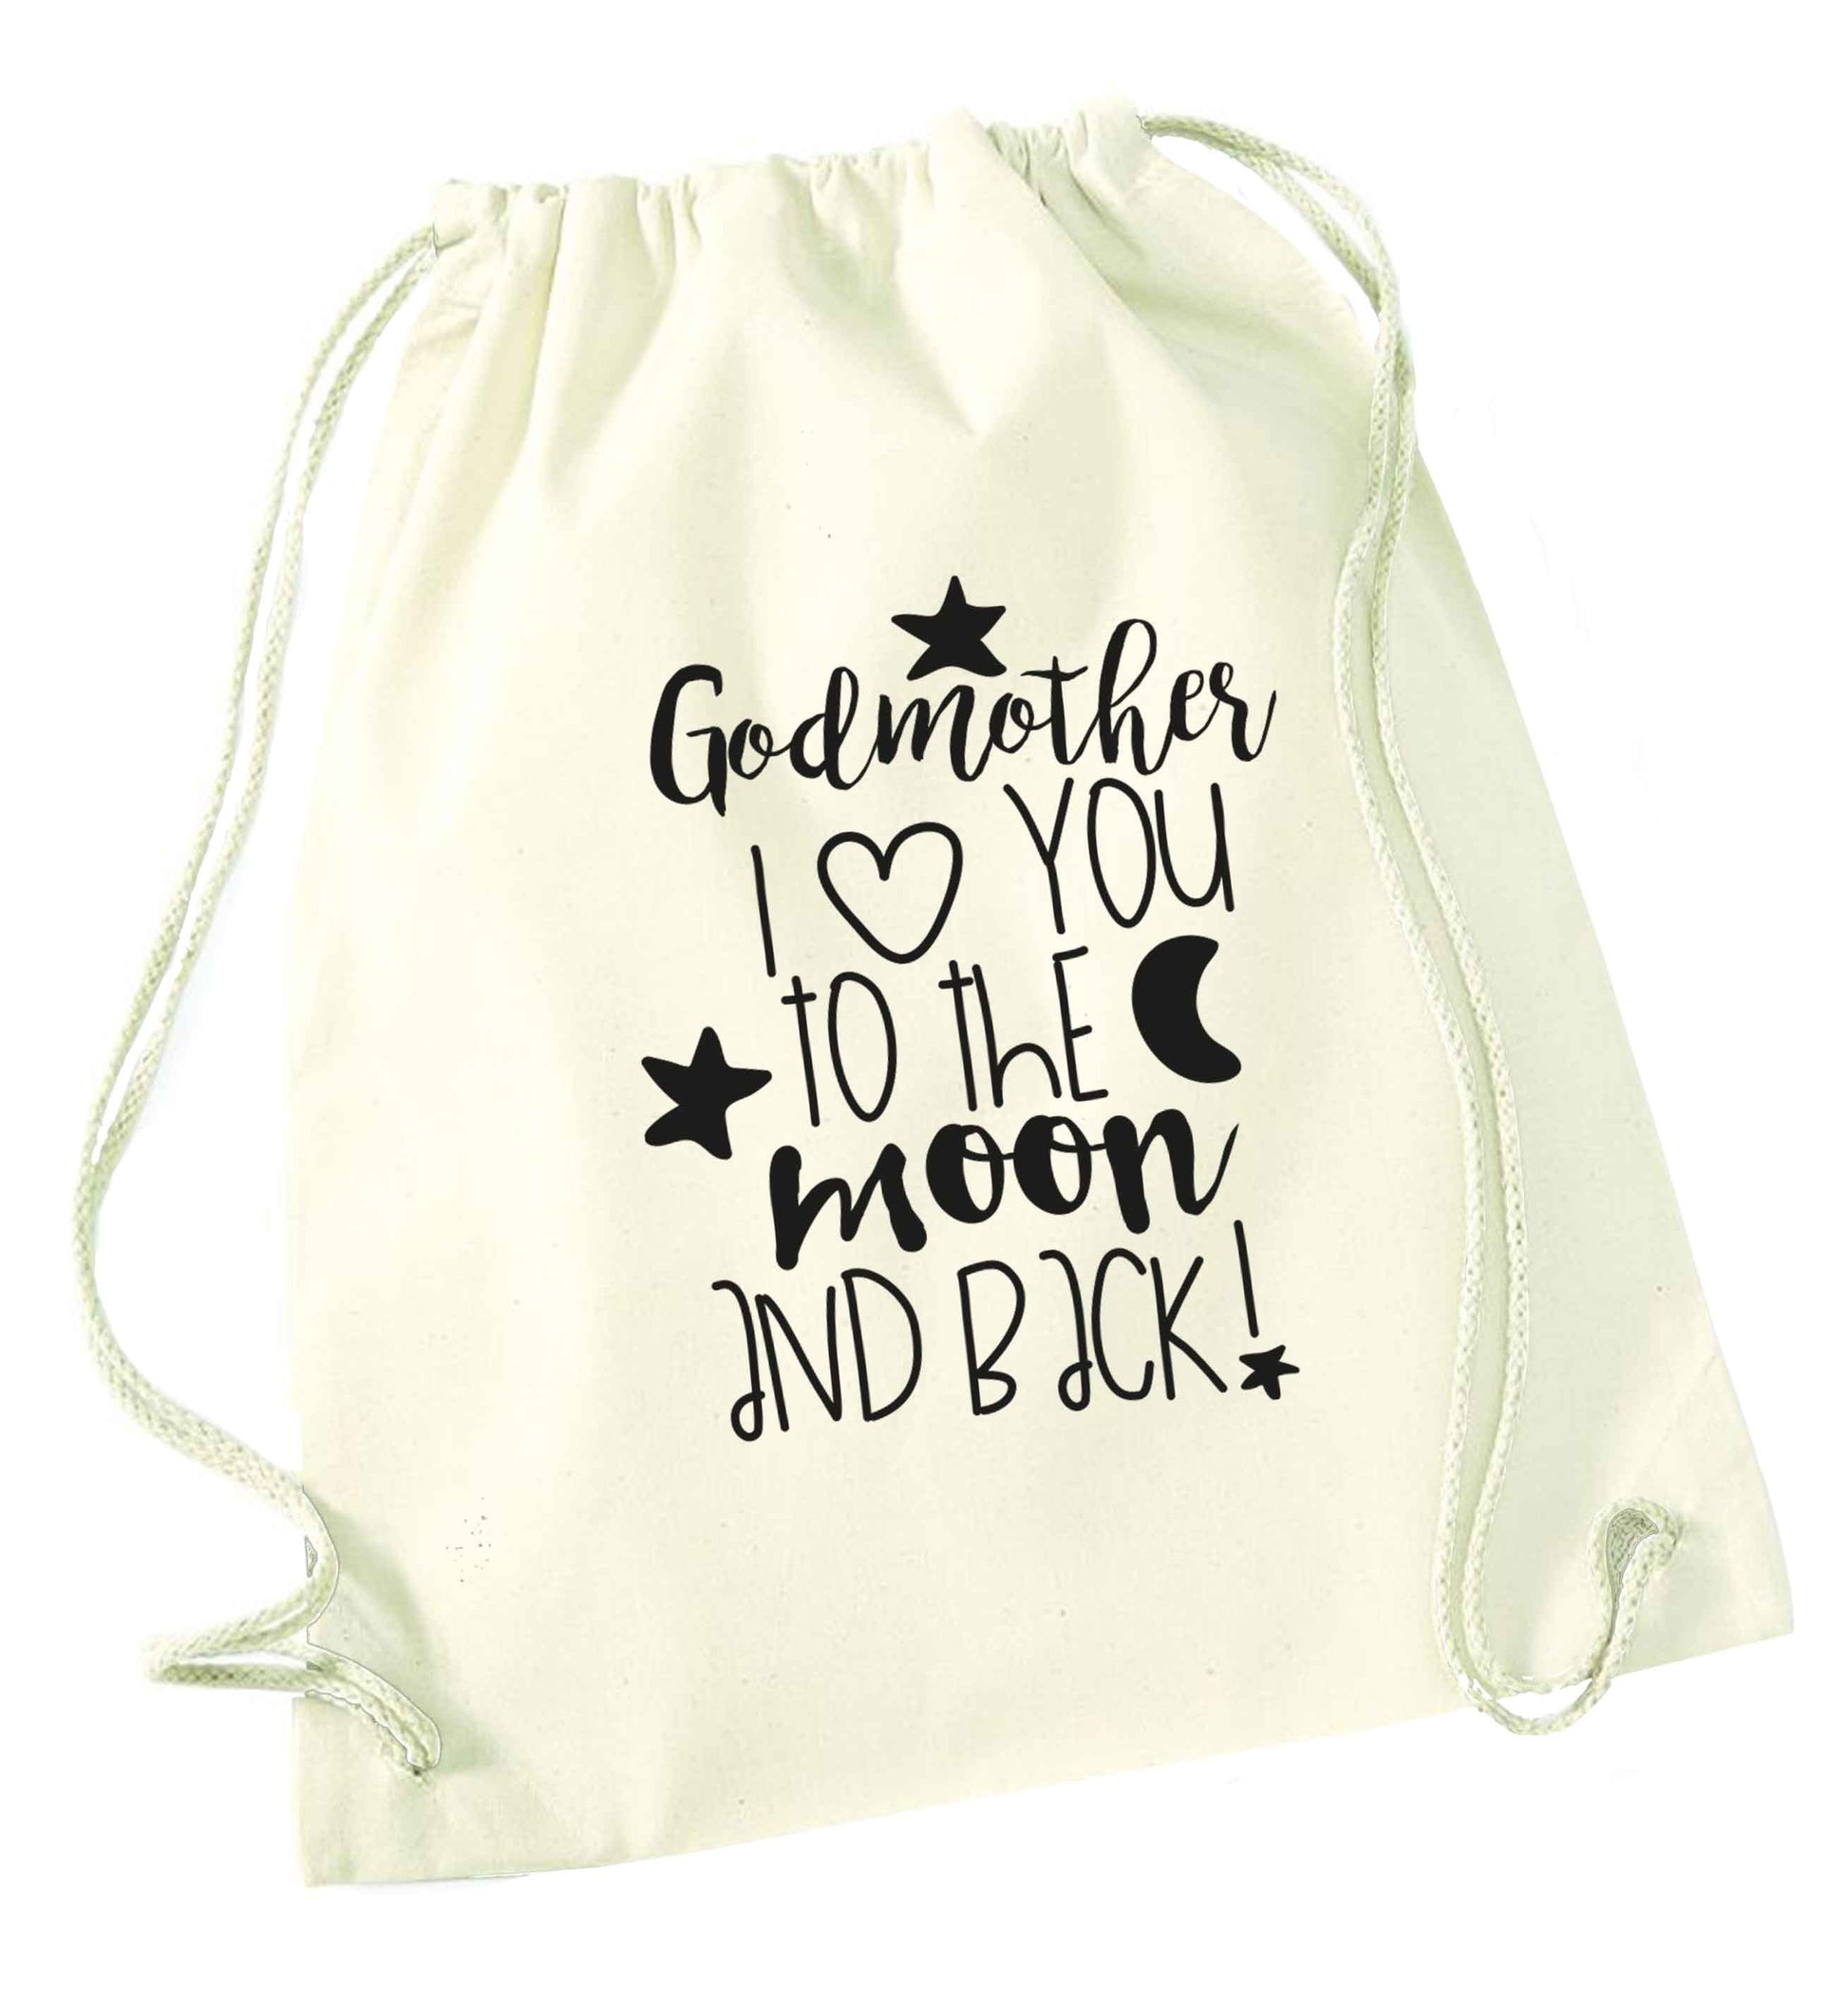 Godmother I love you to the moon and back natural drawstring bag